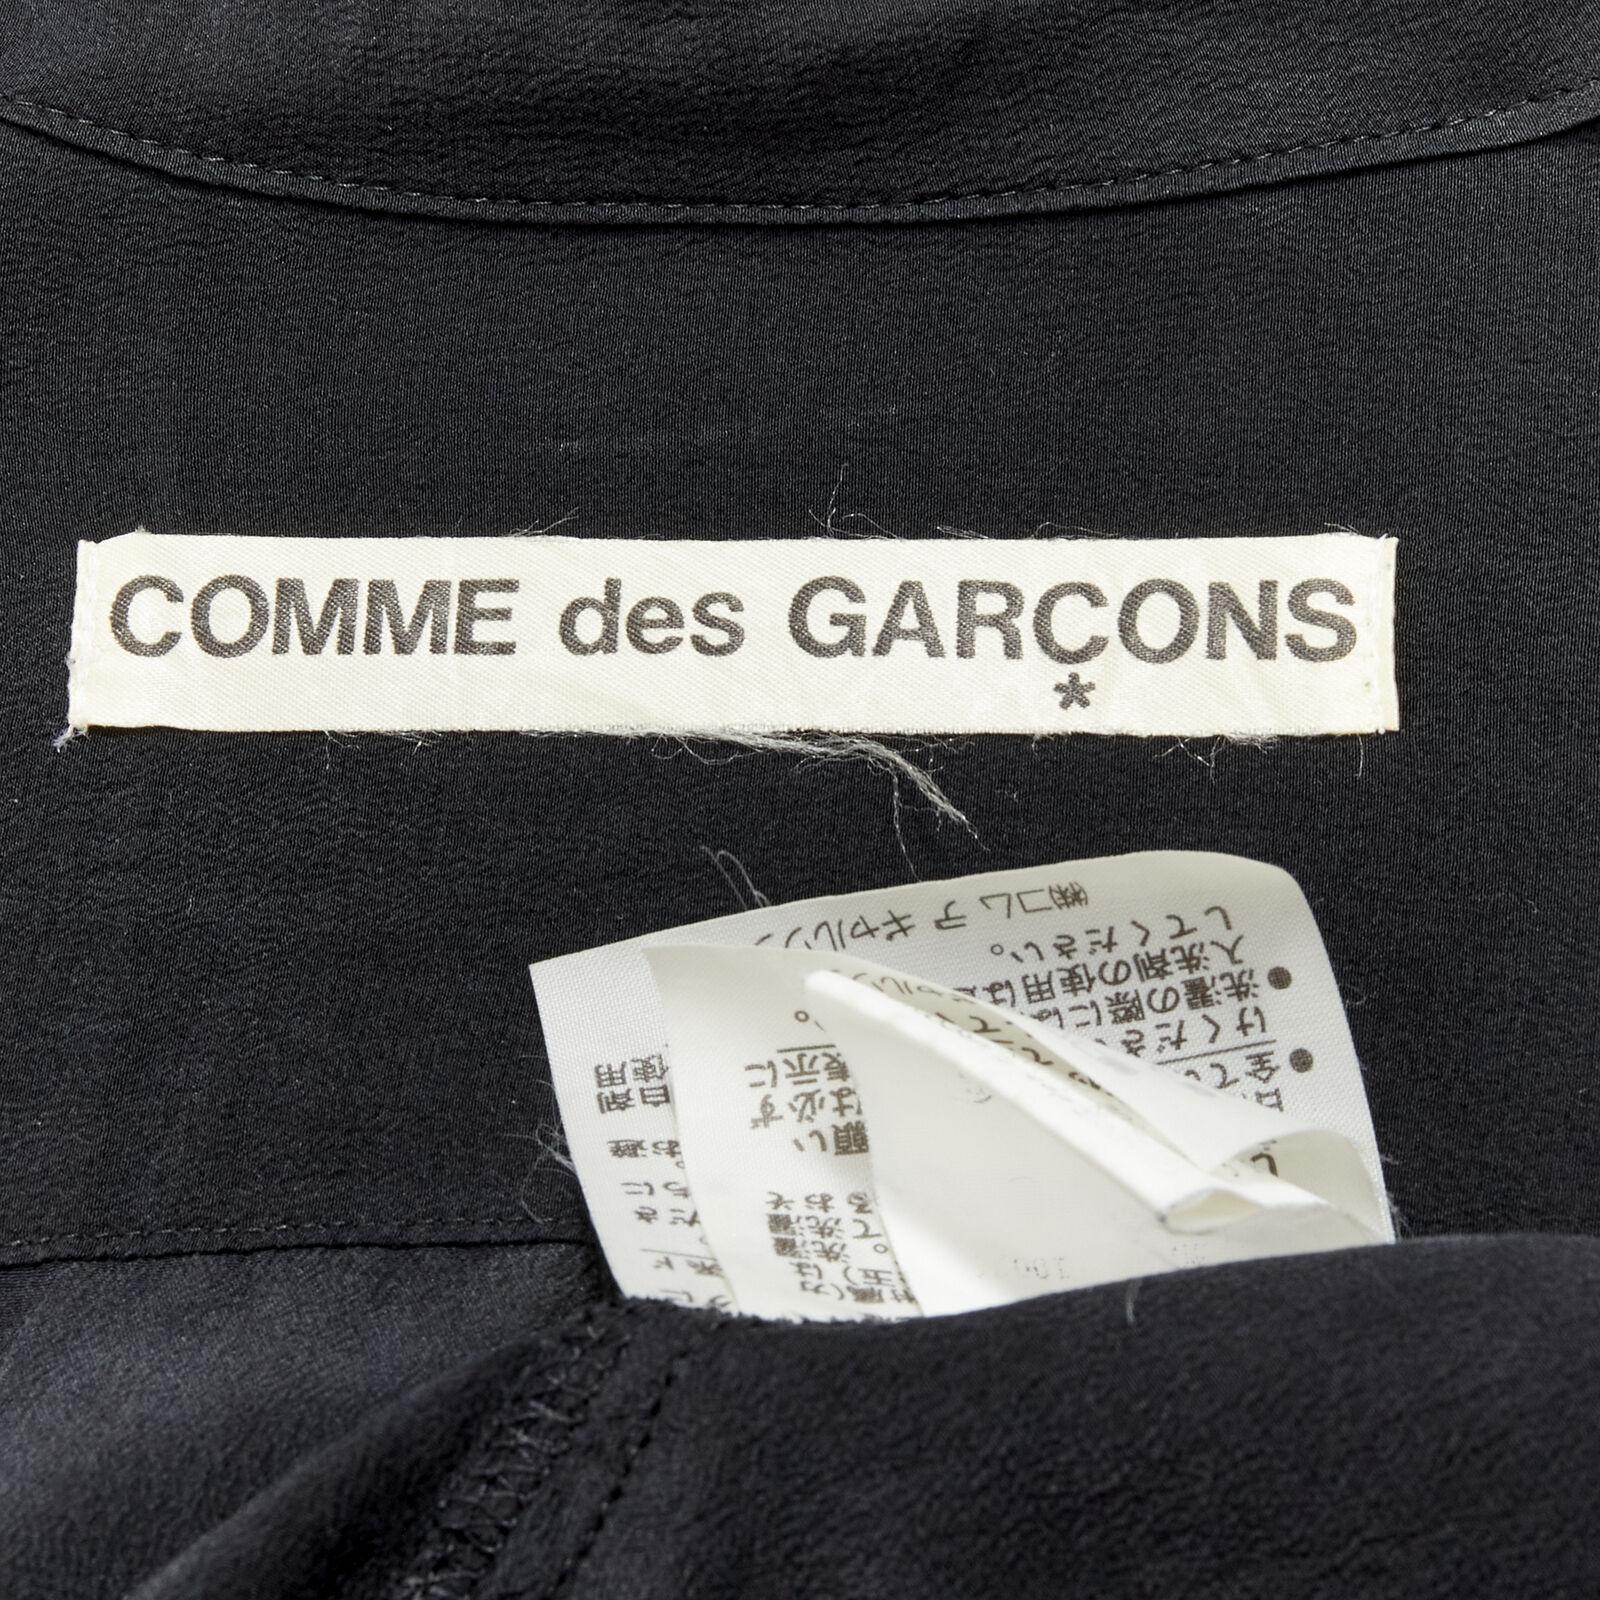 COMME DES GARCONS 1980's Vintage black waterfall draped chandelier jewel shirt For Sale 3